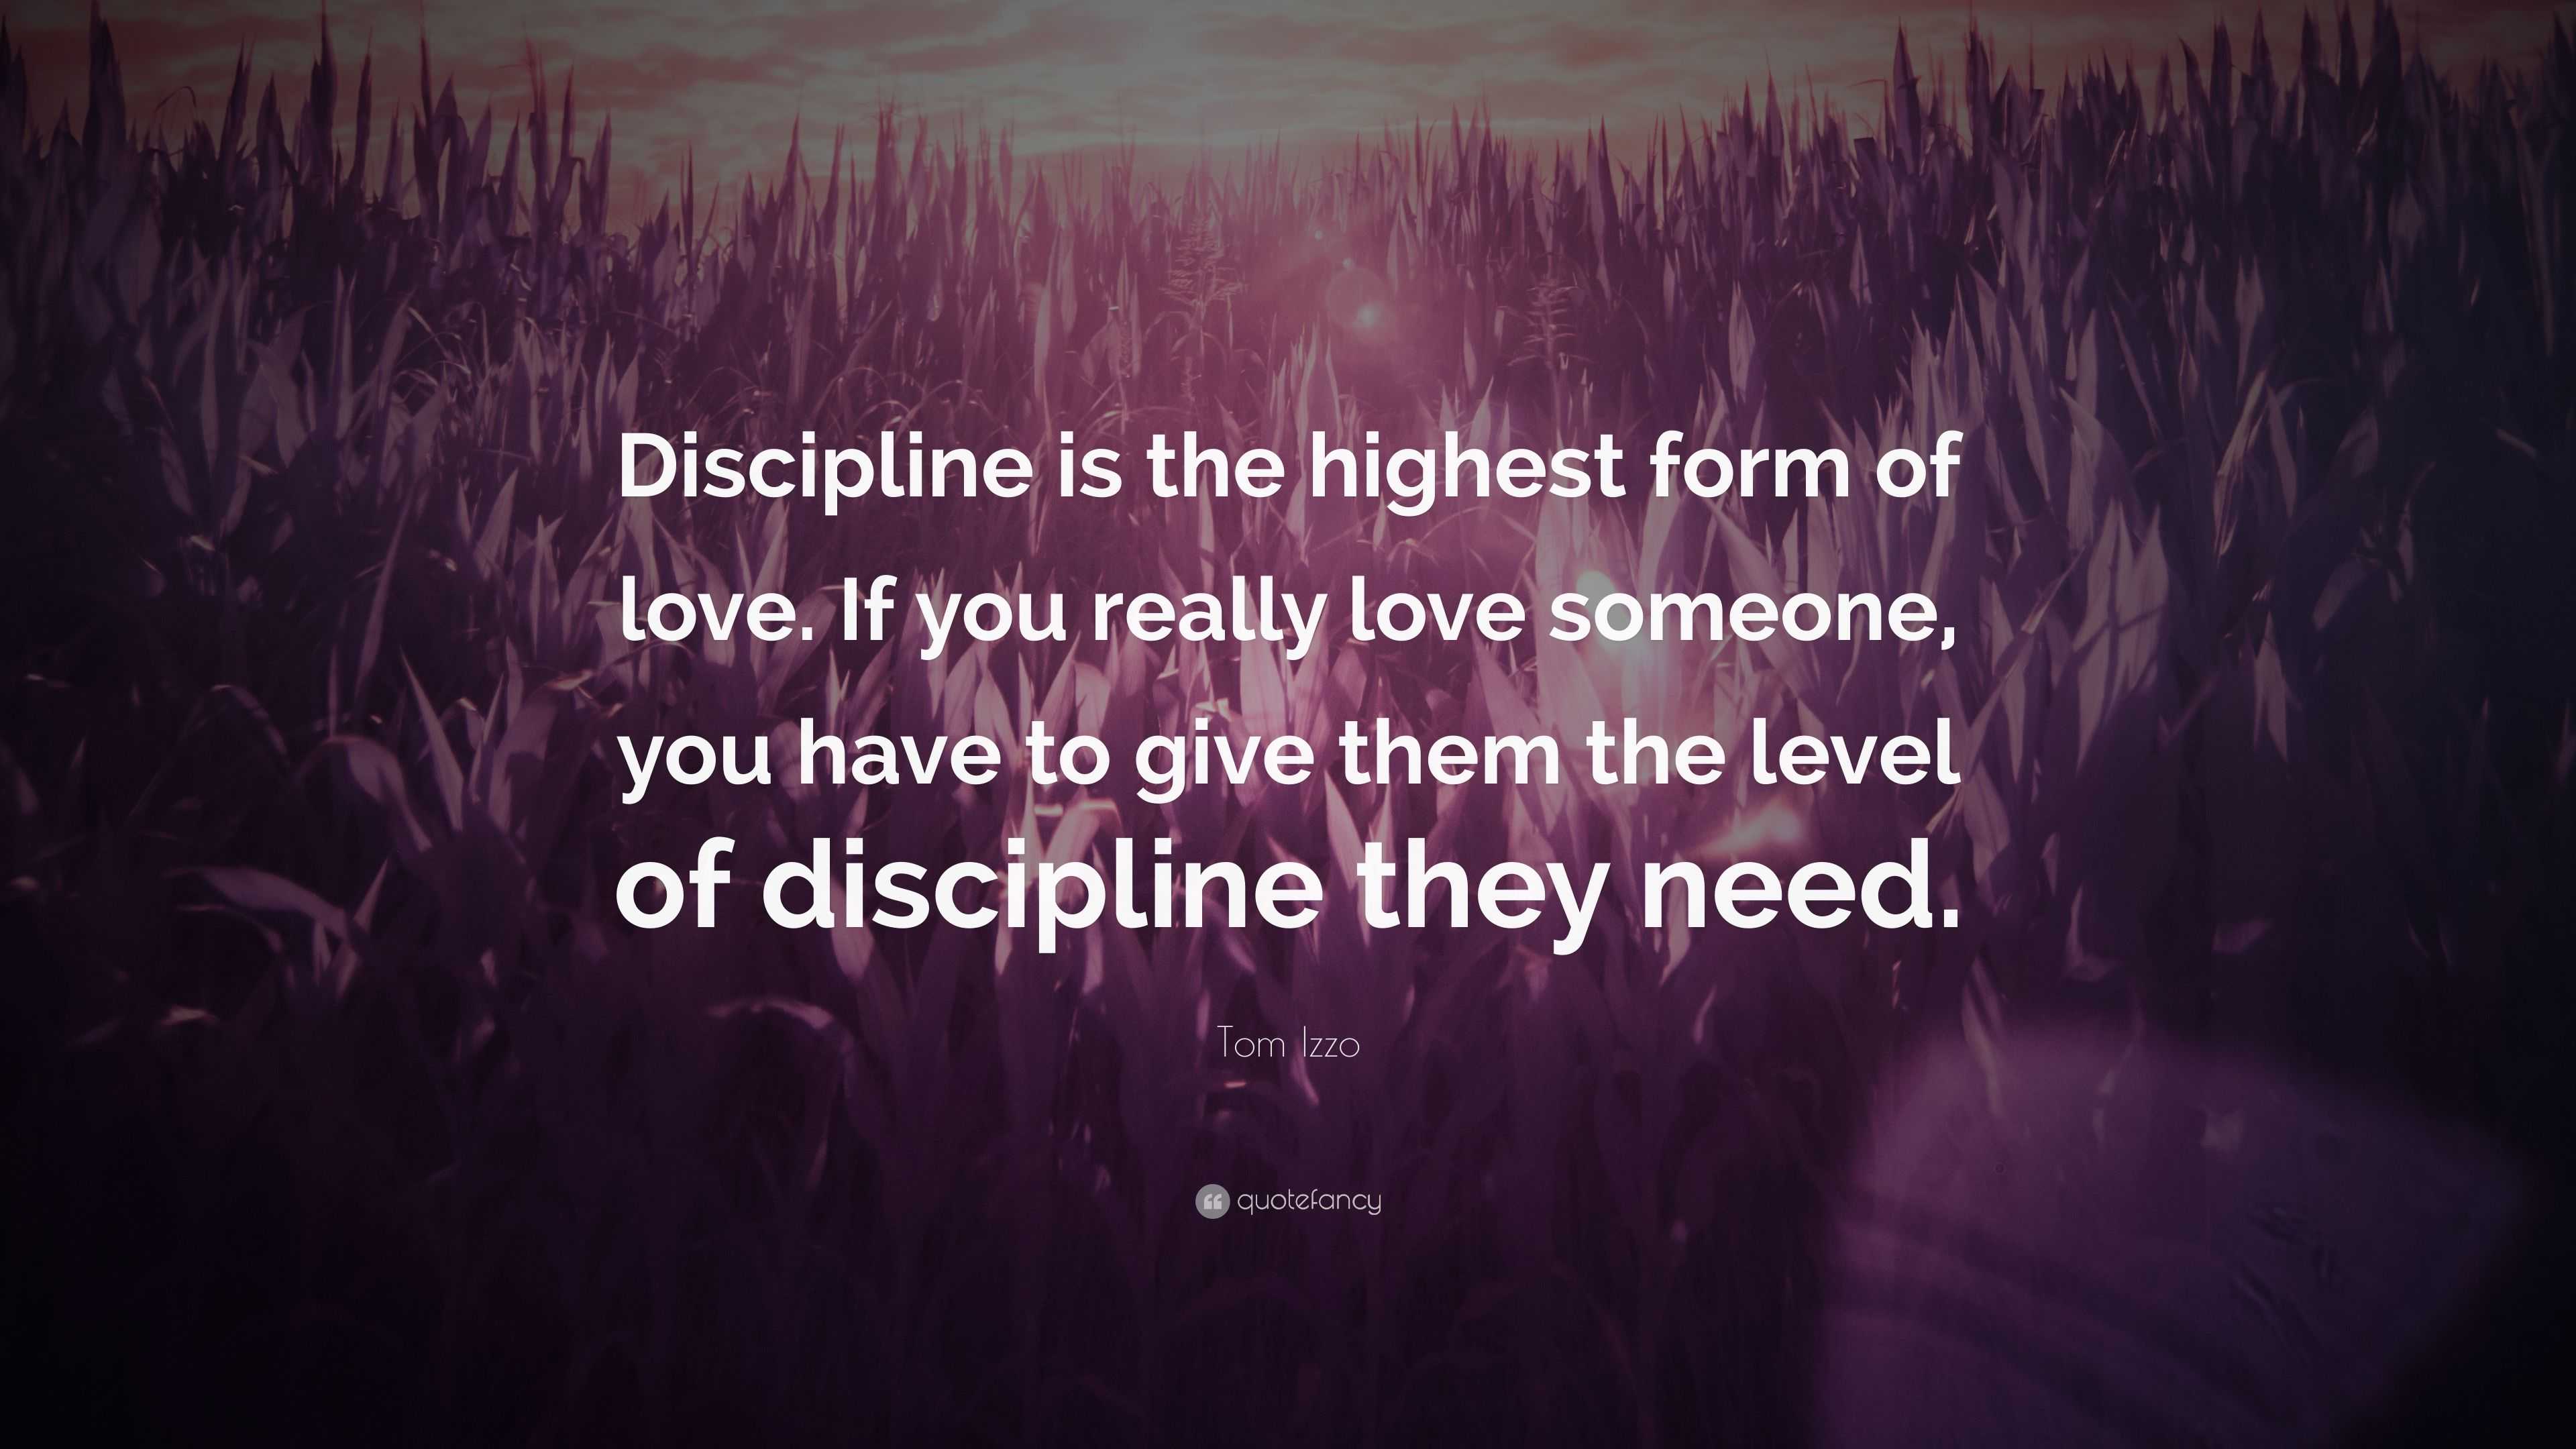 Tom Izzo Quote “Discipline is the highest form of love If you really